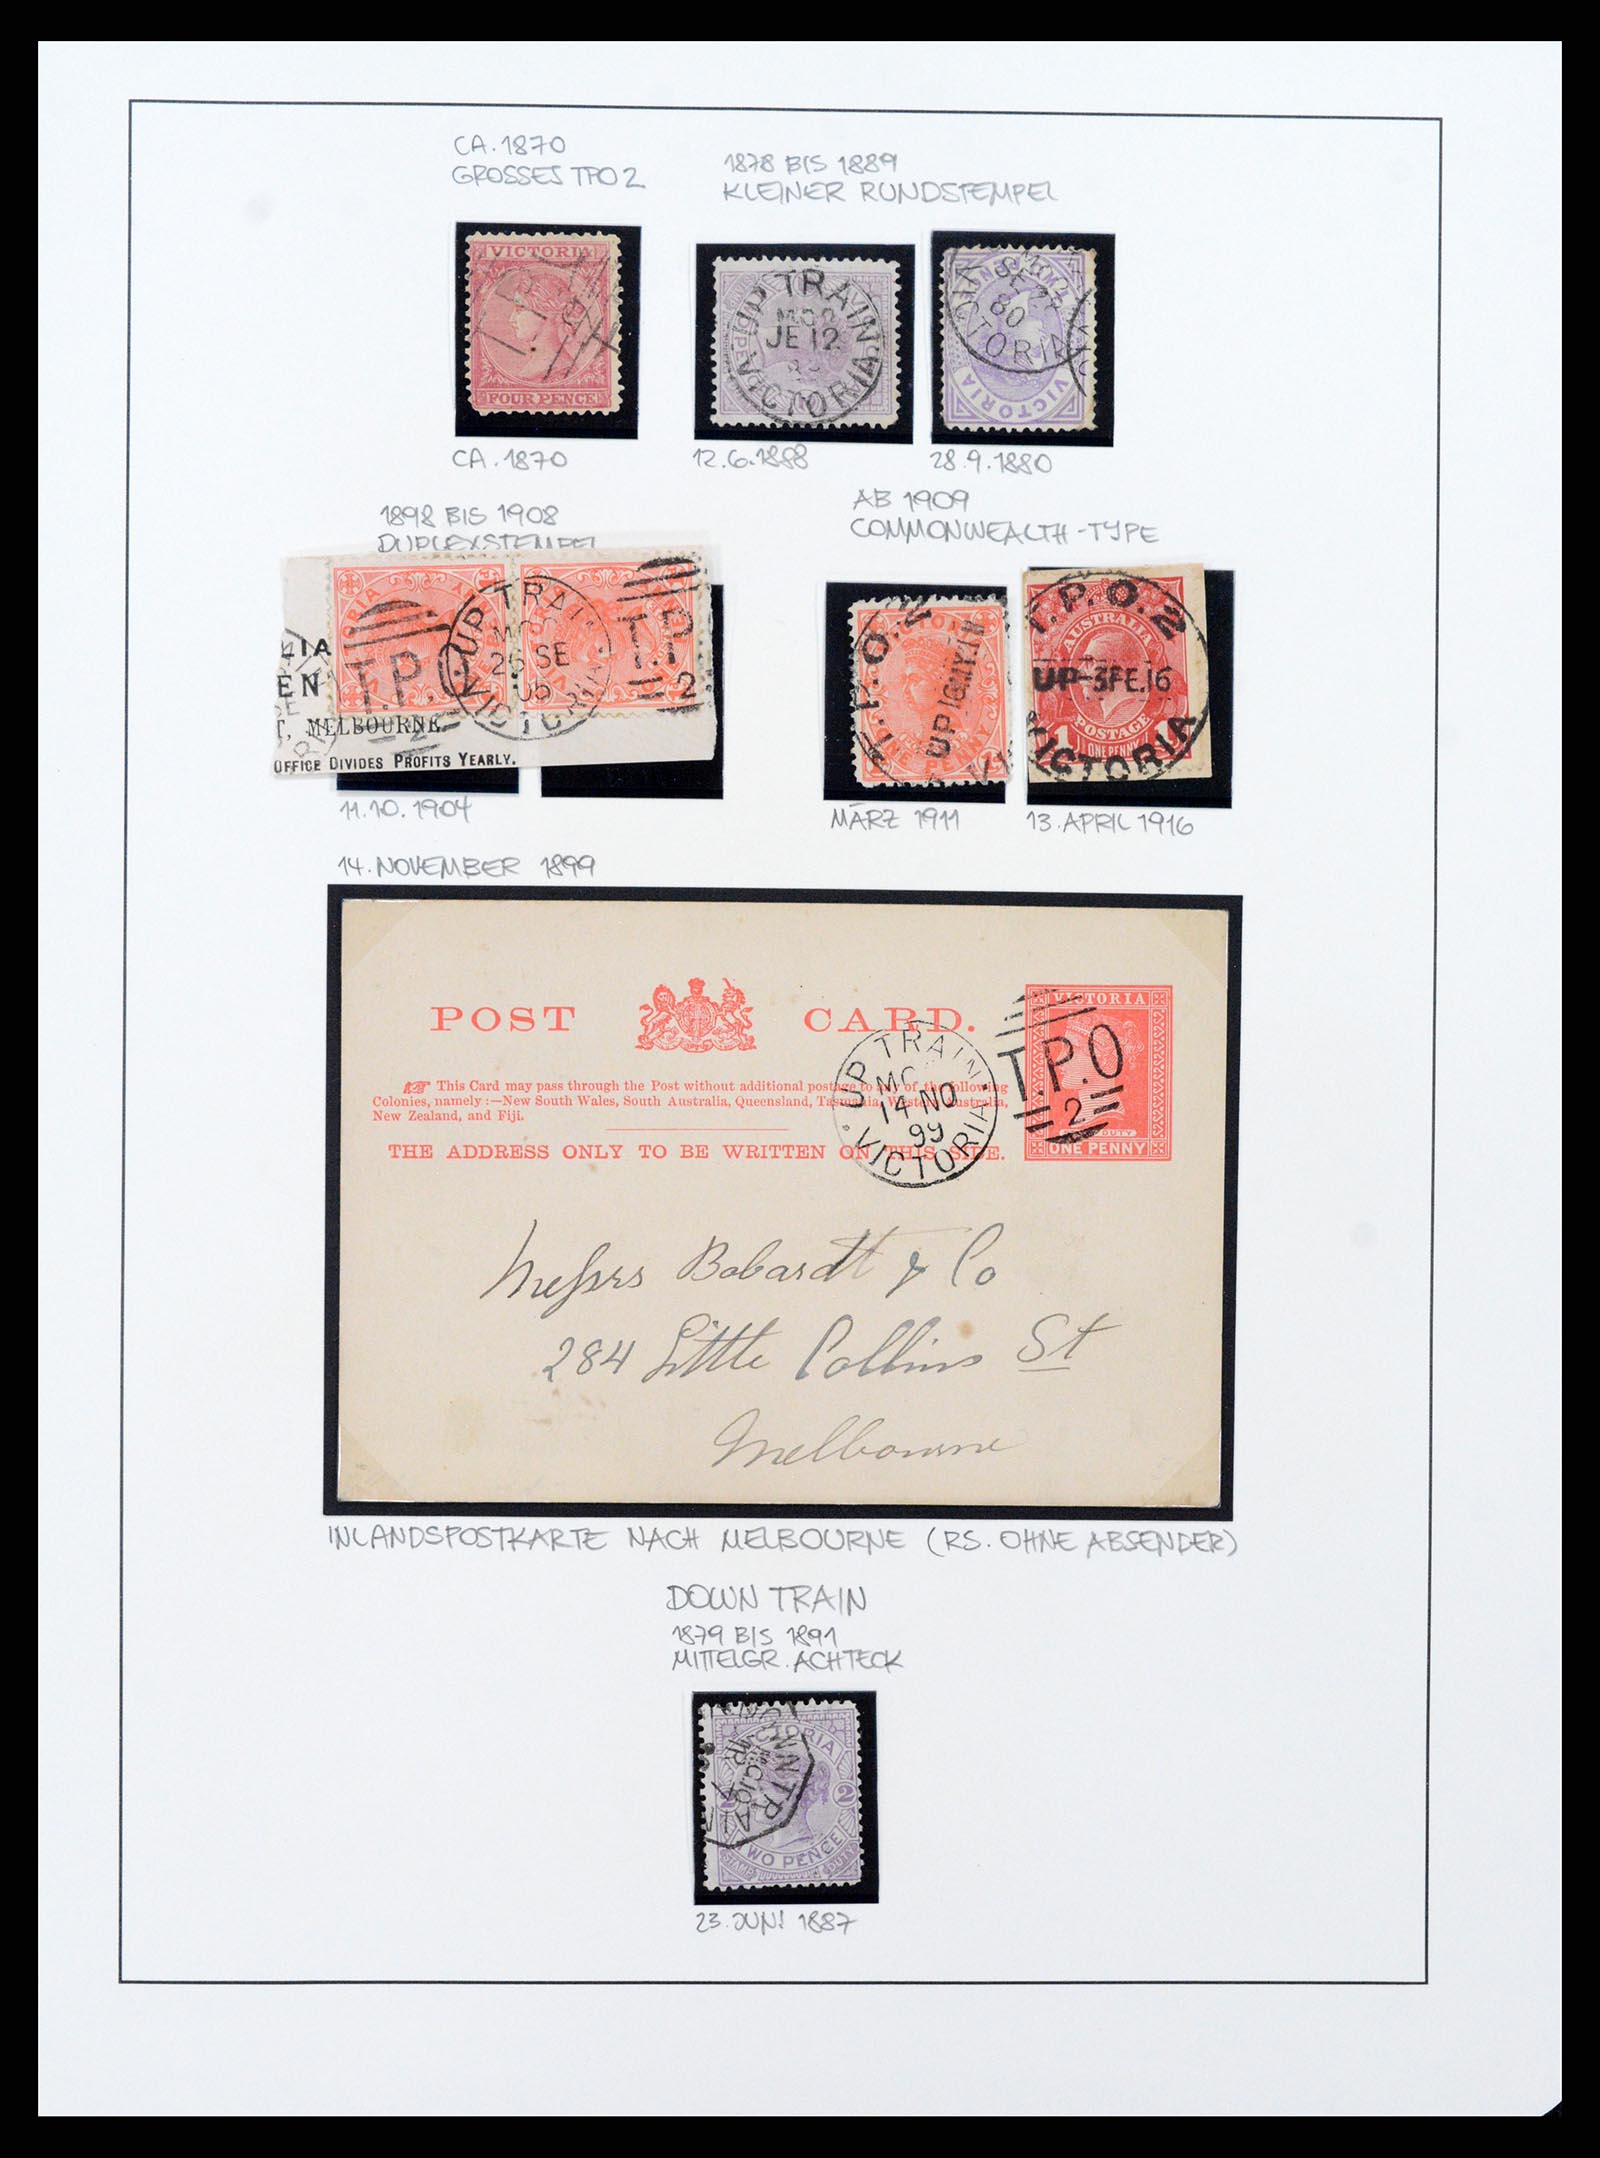 37514 003 - Stamp collection 37514 Victoria tpo cancellations 1865-1930.